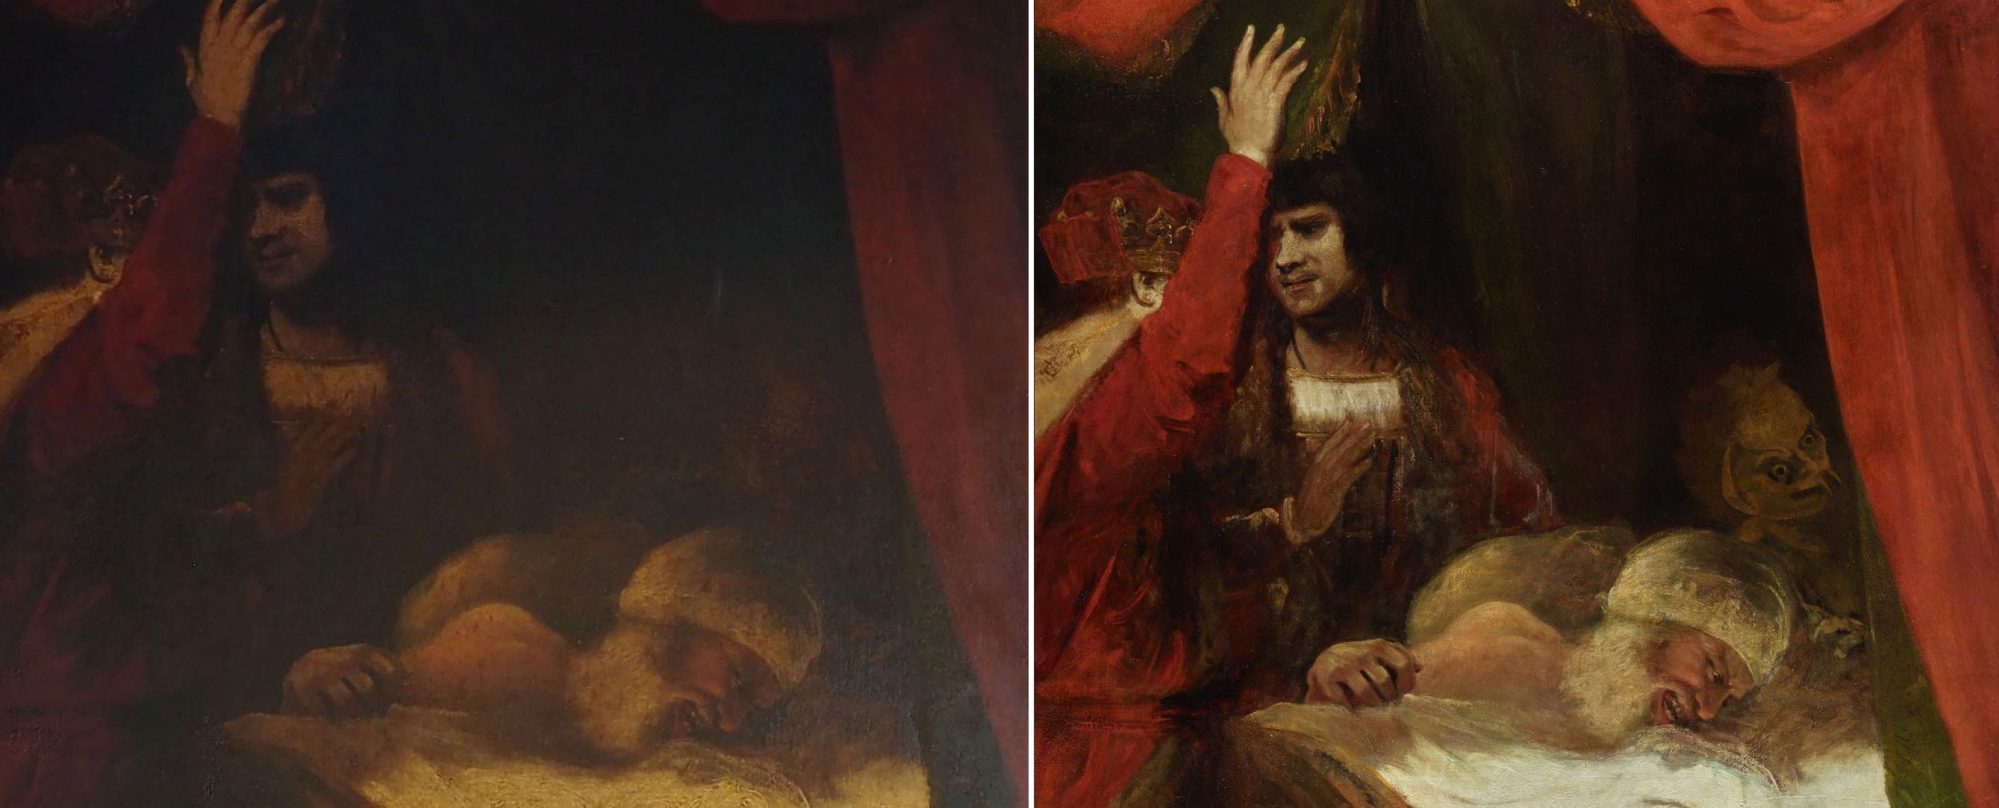 12 Before and after - detail of Joshua Reynolds, The Death of Cardinal Beaufort before and after treatment (c)National Trust.jpg